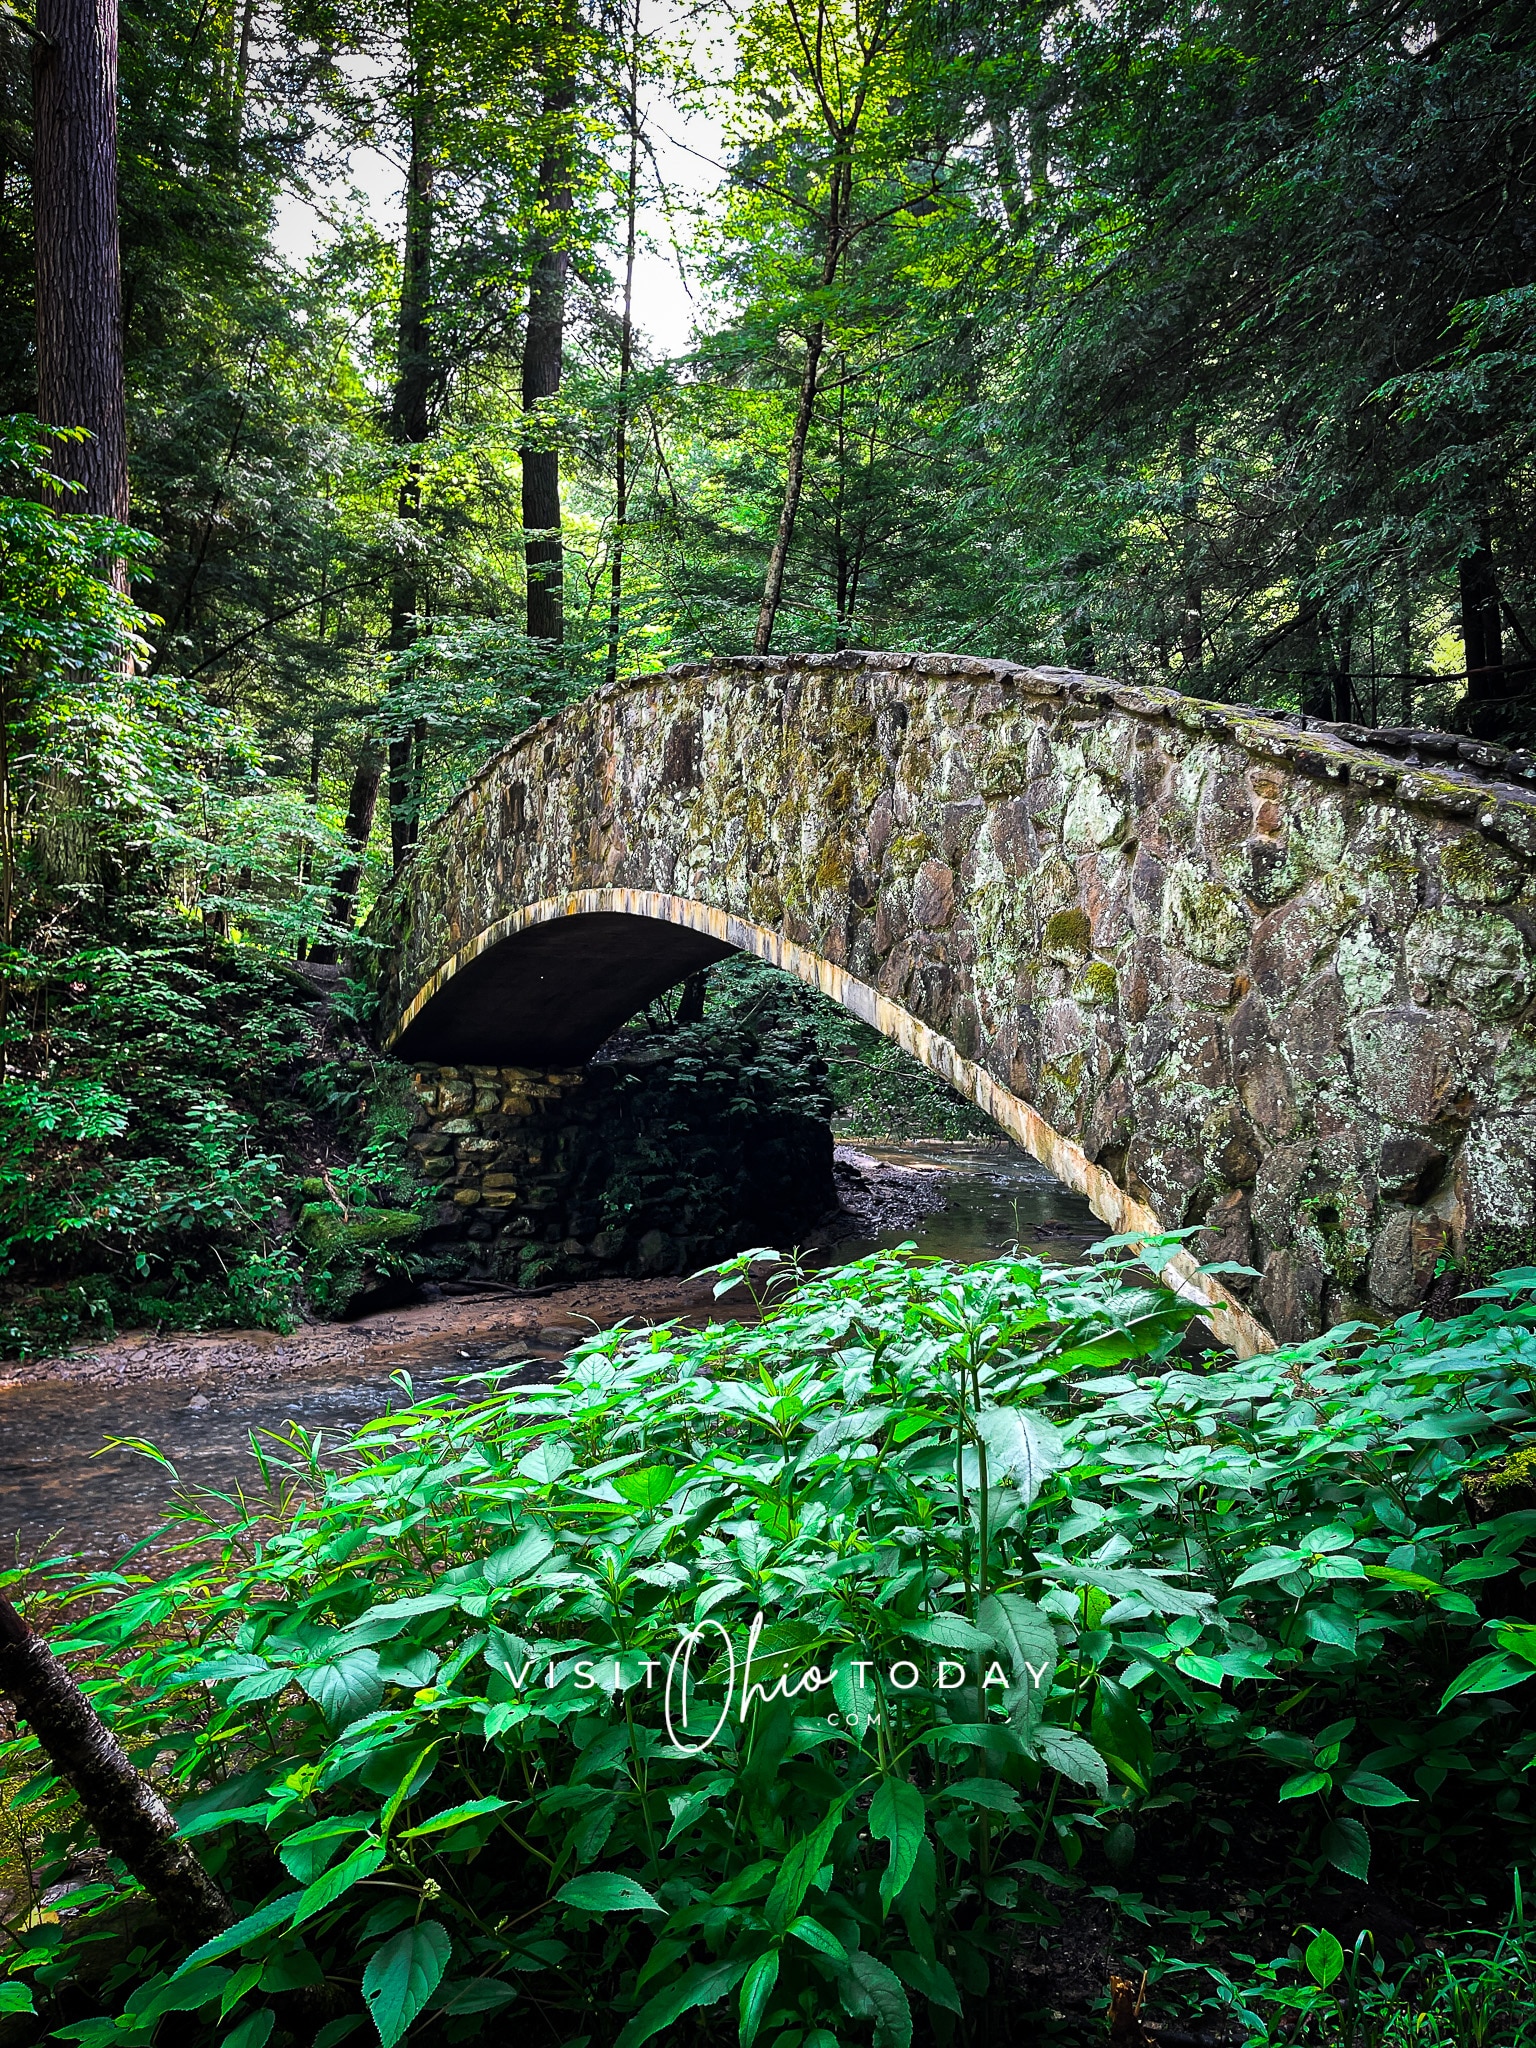 vertical photo showing a stone bridge over the river at old man's cave with a stream beneath it and trees and foliage surrounding it